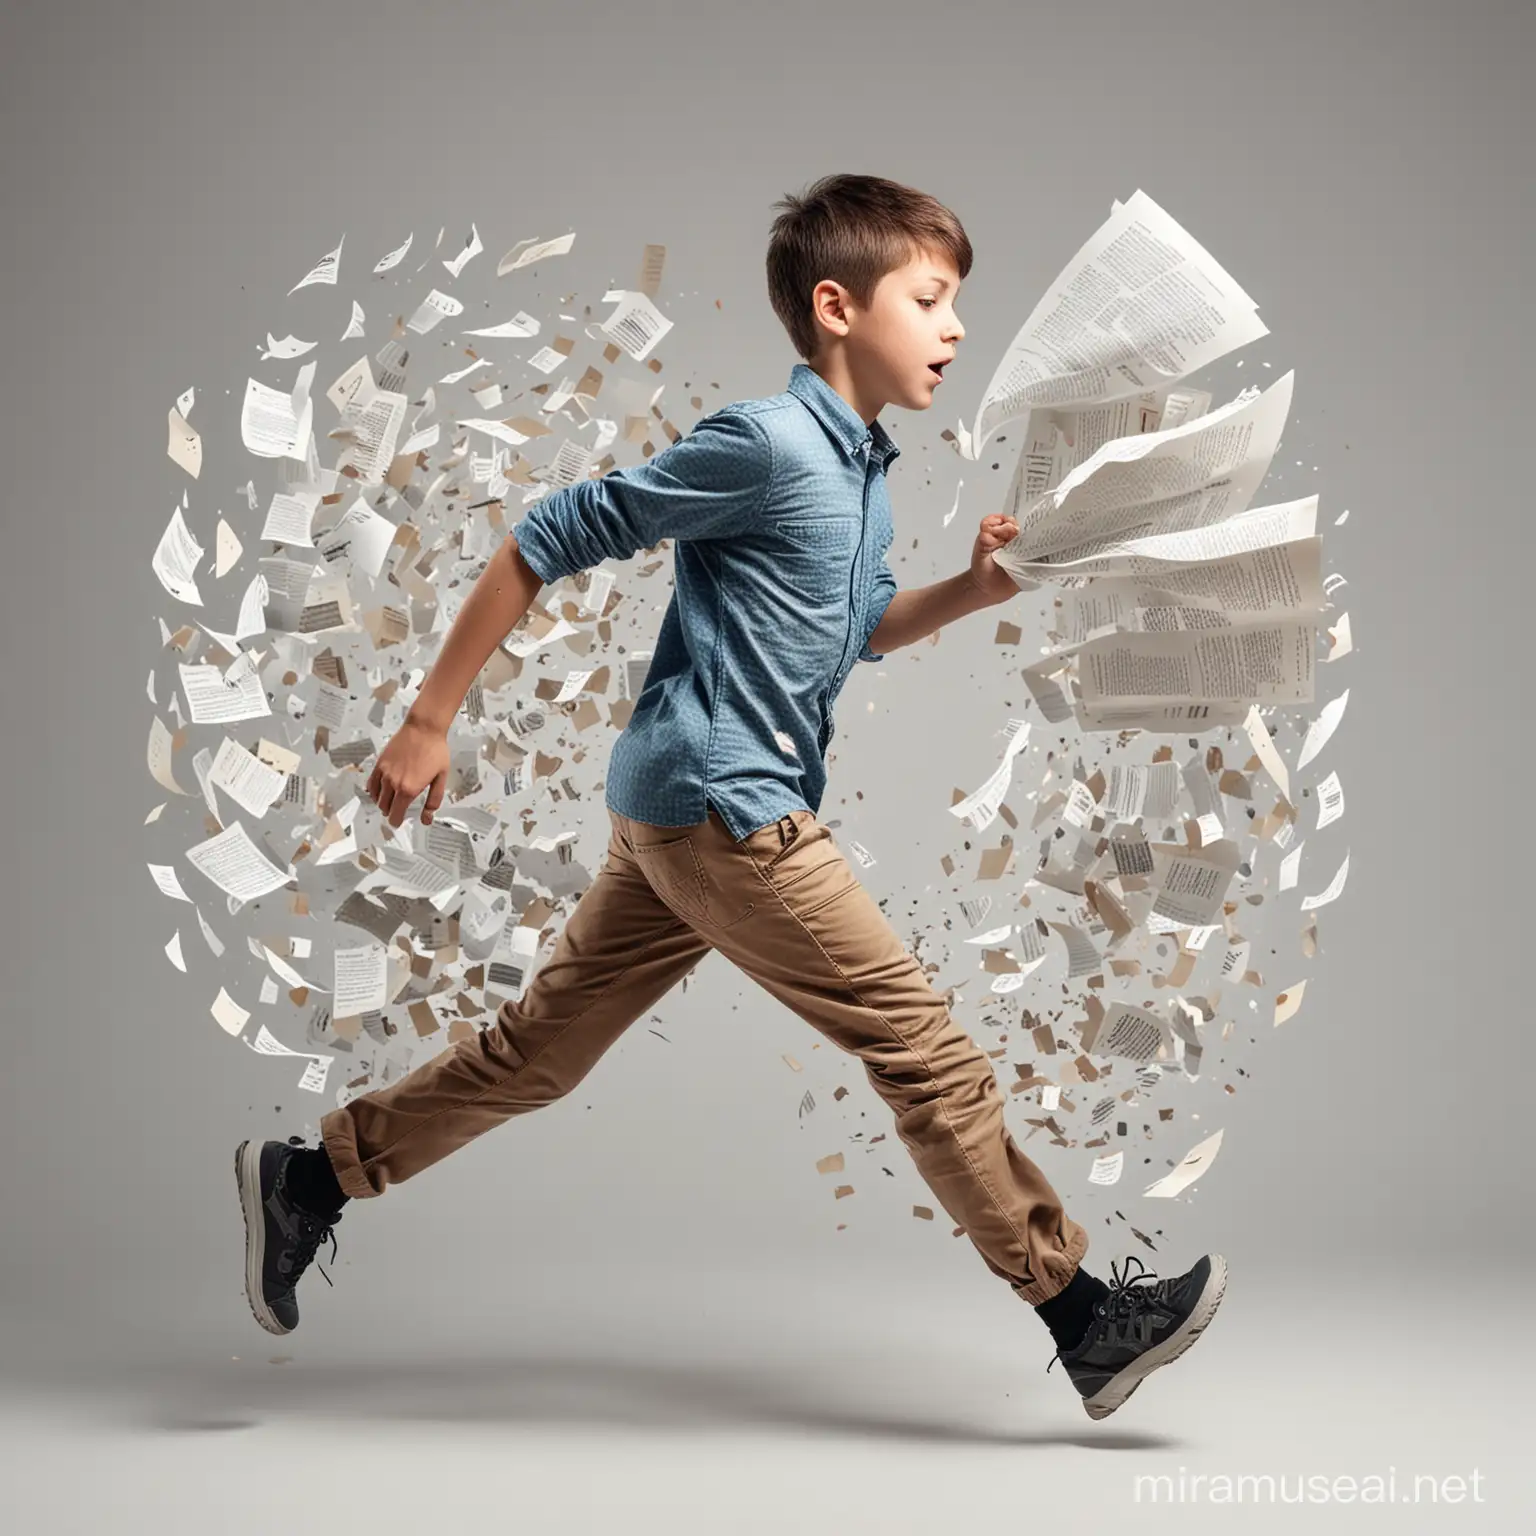 Energetic Boy Running with Scattered Pages